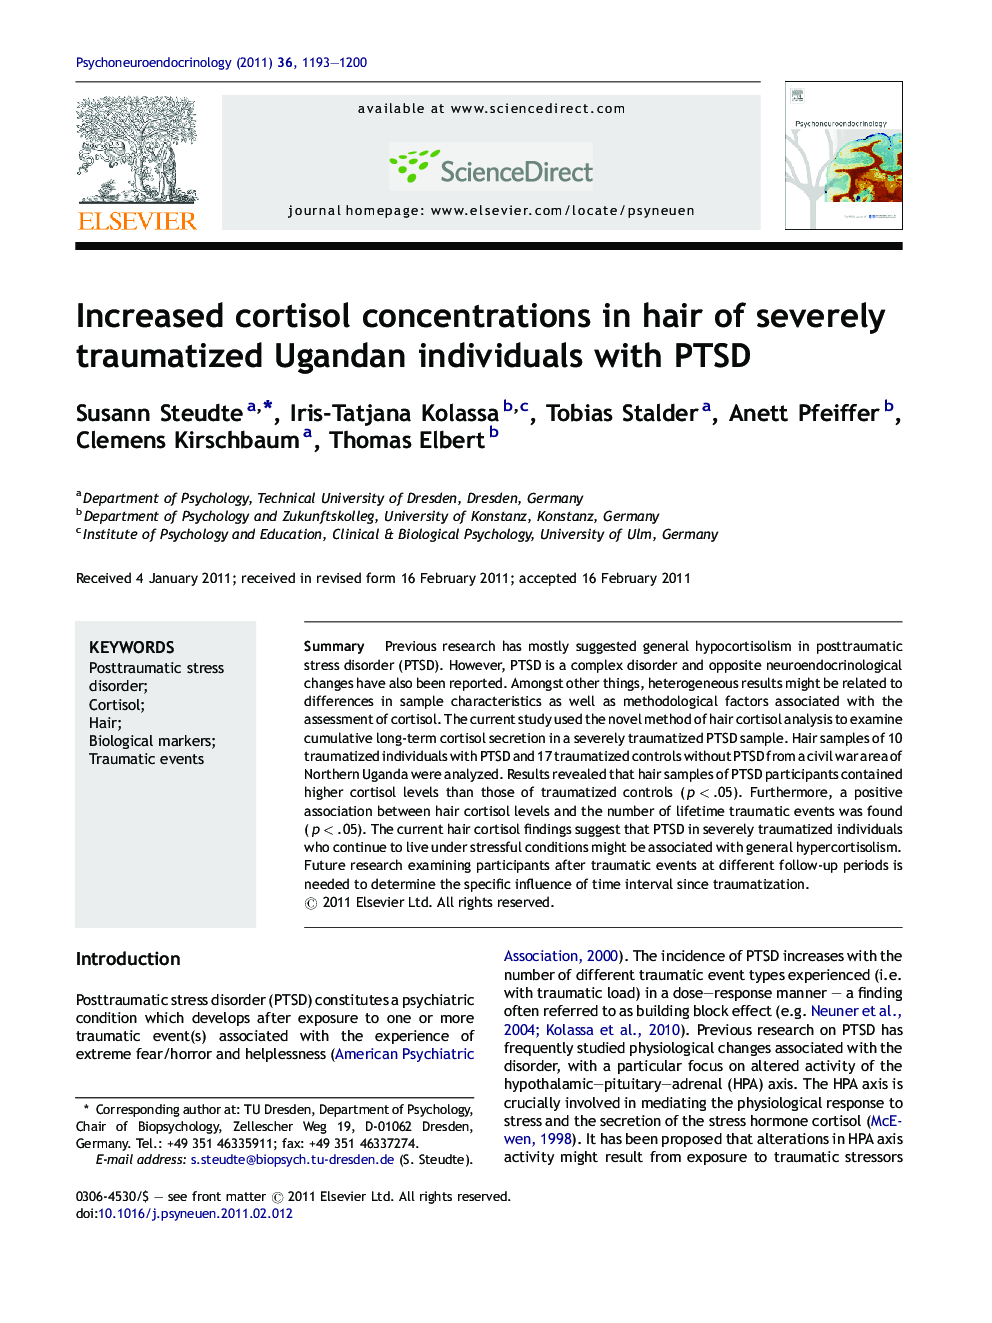 Increased cortisol concentrations in hair of severely traumatized Ugandan individuals with PTSD